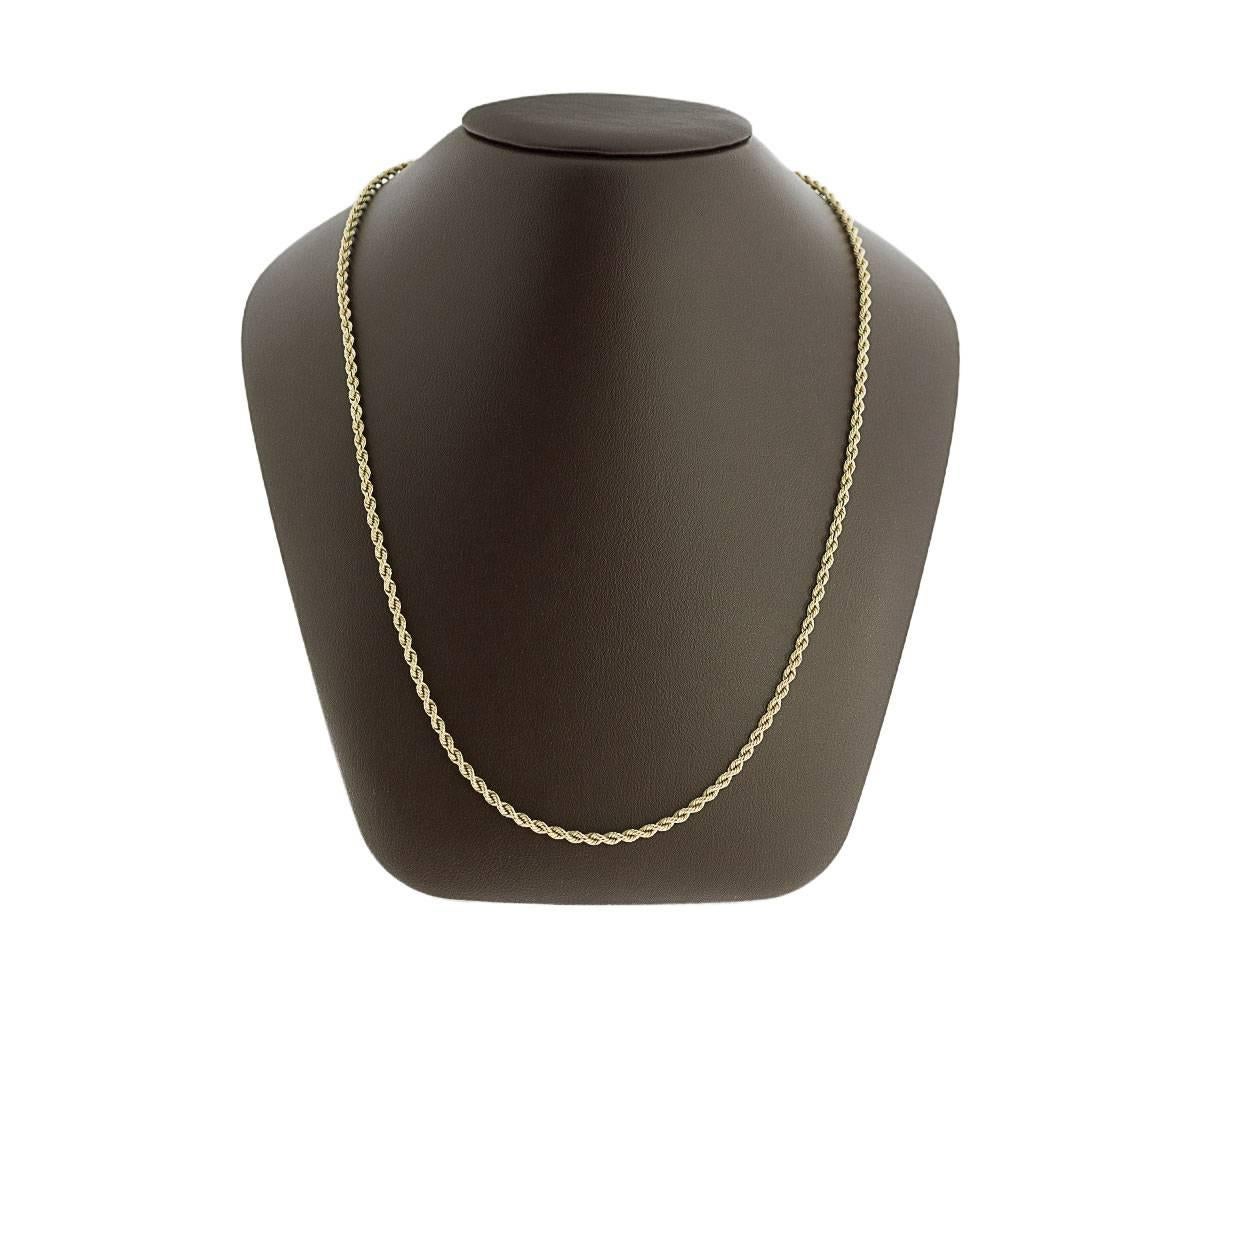 Make this beautiful Tiffany & Co. rope chain necklace yours today! It is comprised of 14K yellow gold and weighs approximately 20.6 grams. This stunning necklace has a length of 24 inches and features a barrel clasp. MSRP $3,500! 

Details:
Tiffany